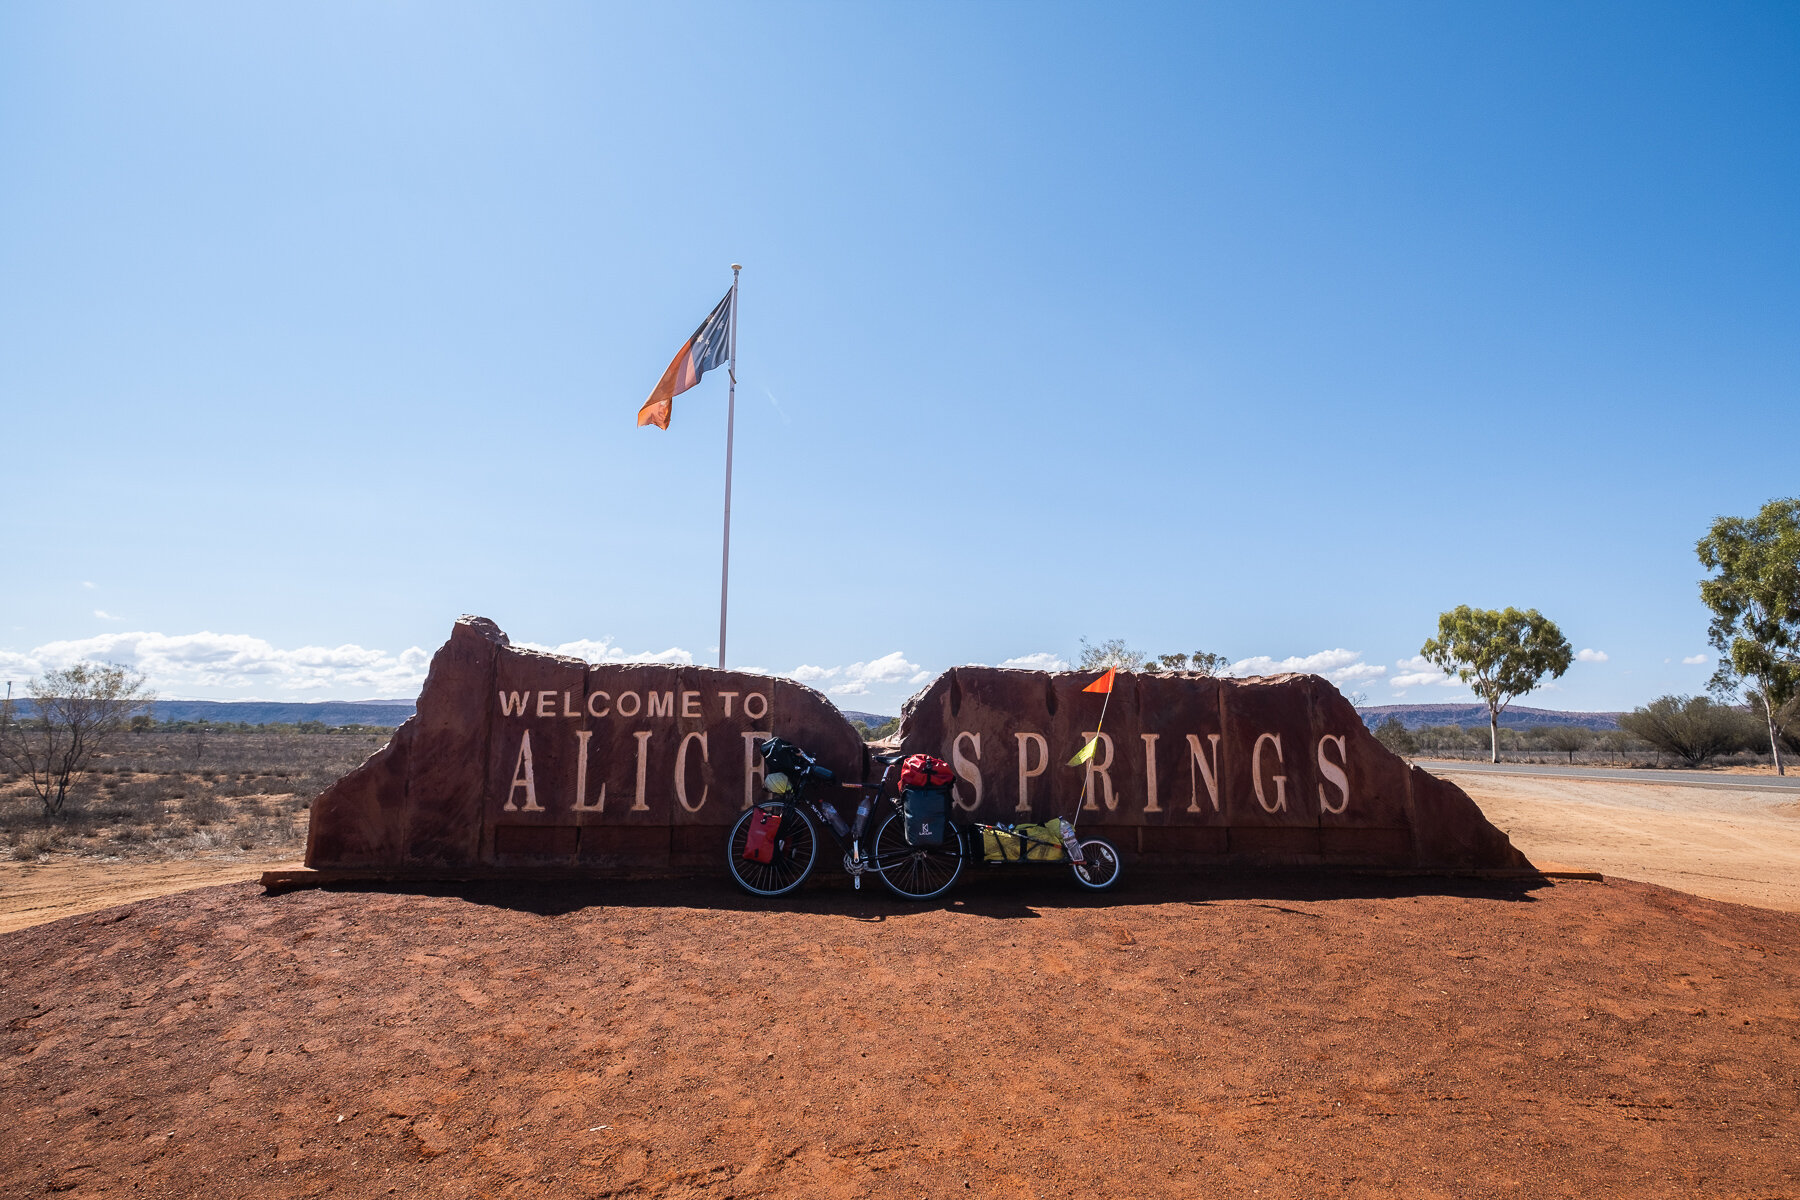  Alice Springs is a well-known destination for mountain bikers who seek adventure and thrill. The off-road cycling tracks here are some of the best in the country, attracting cyclists from all over. But it's not just the tracks that make Alice Spring